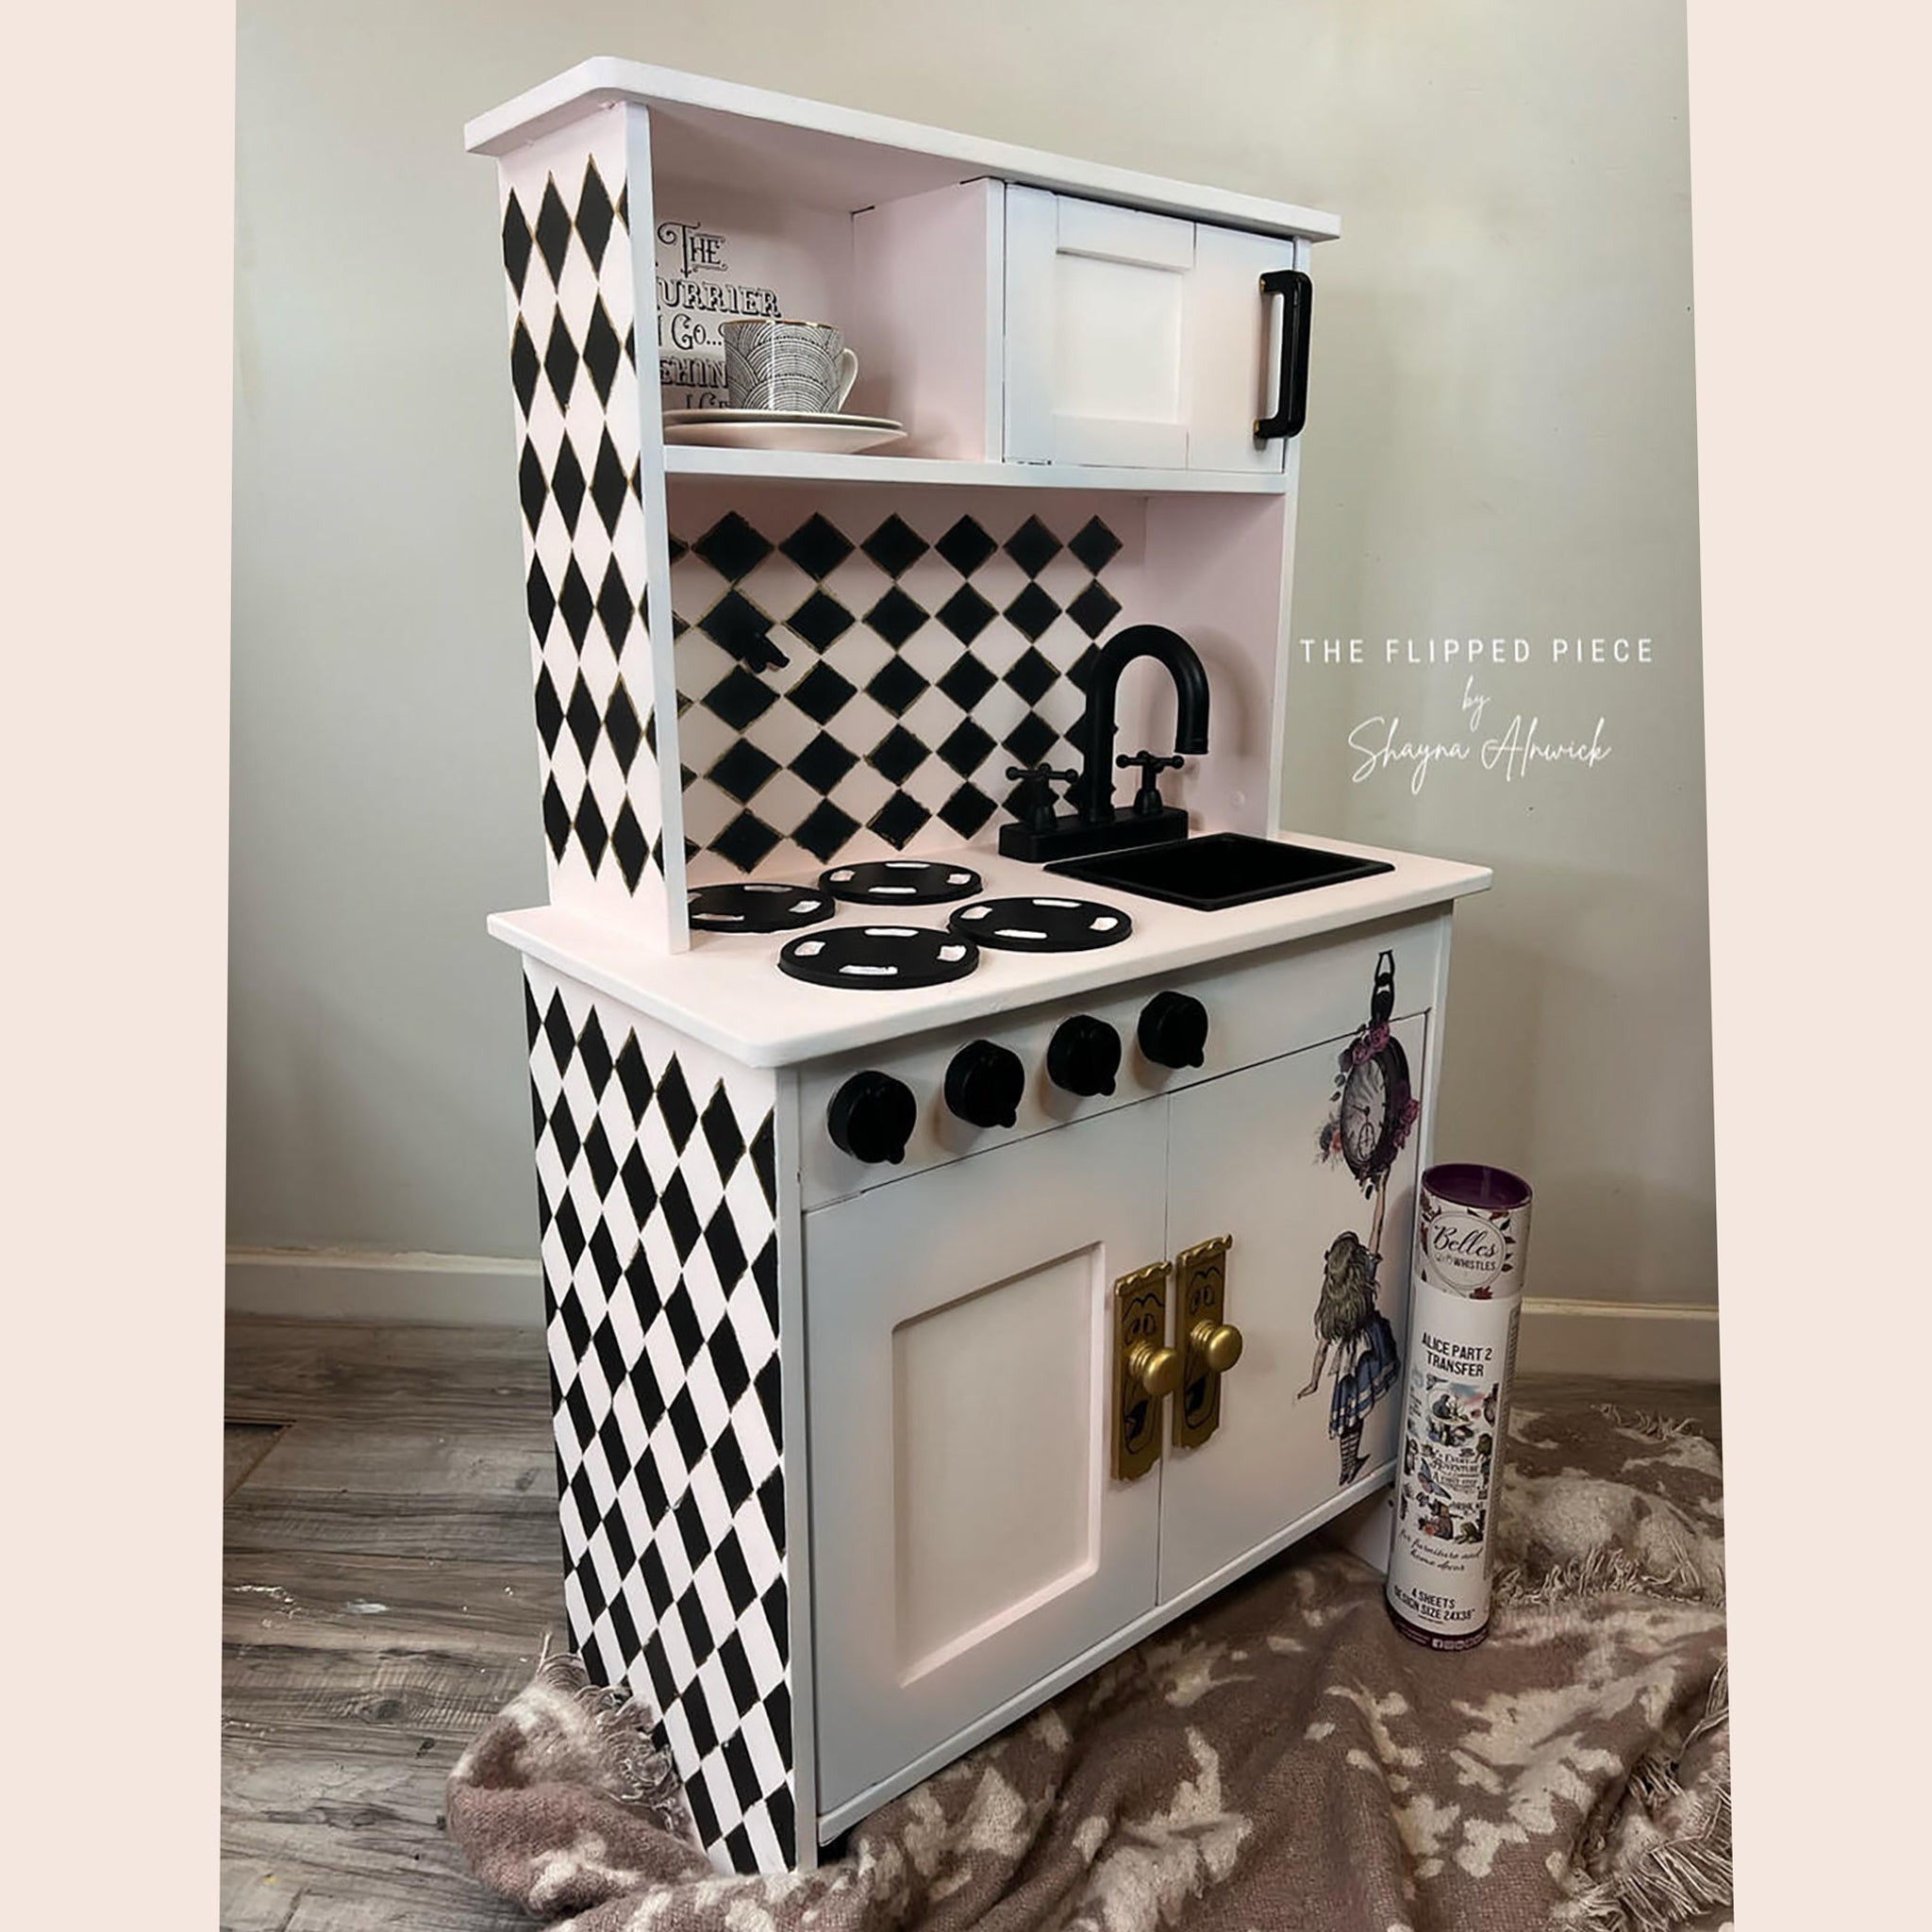 A children's play kitchen refurbished by The Flipped Piece by Shayna Alnwick has been painted white and pale pink with black harlequin diamonds and features parts of the Alice Part 2 transfer.